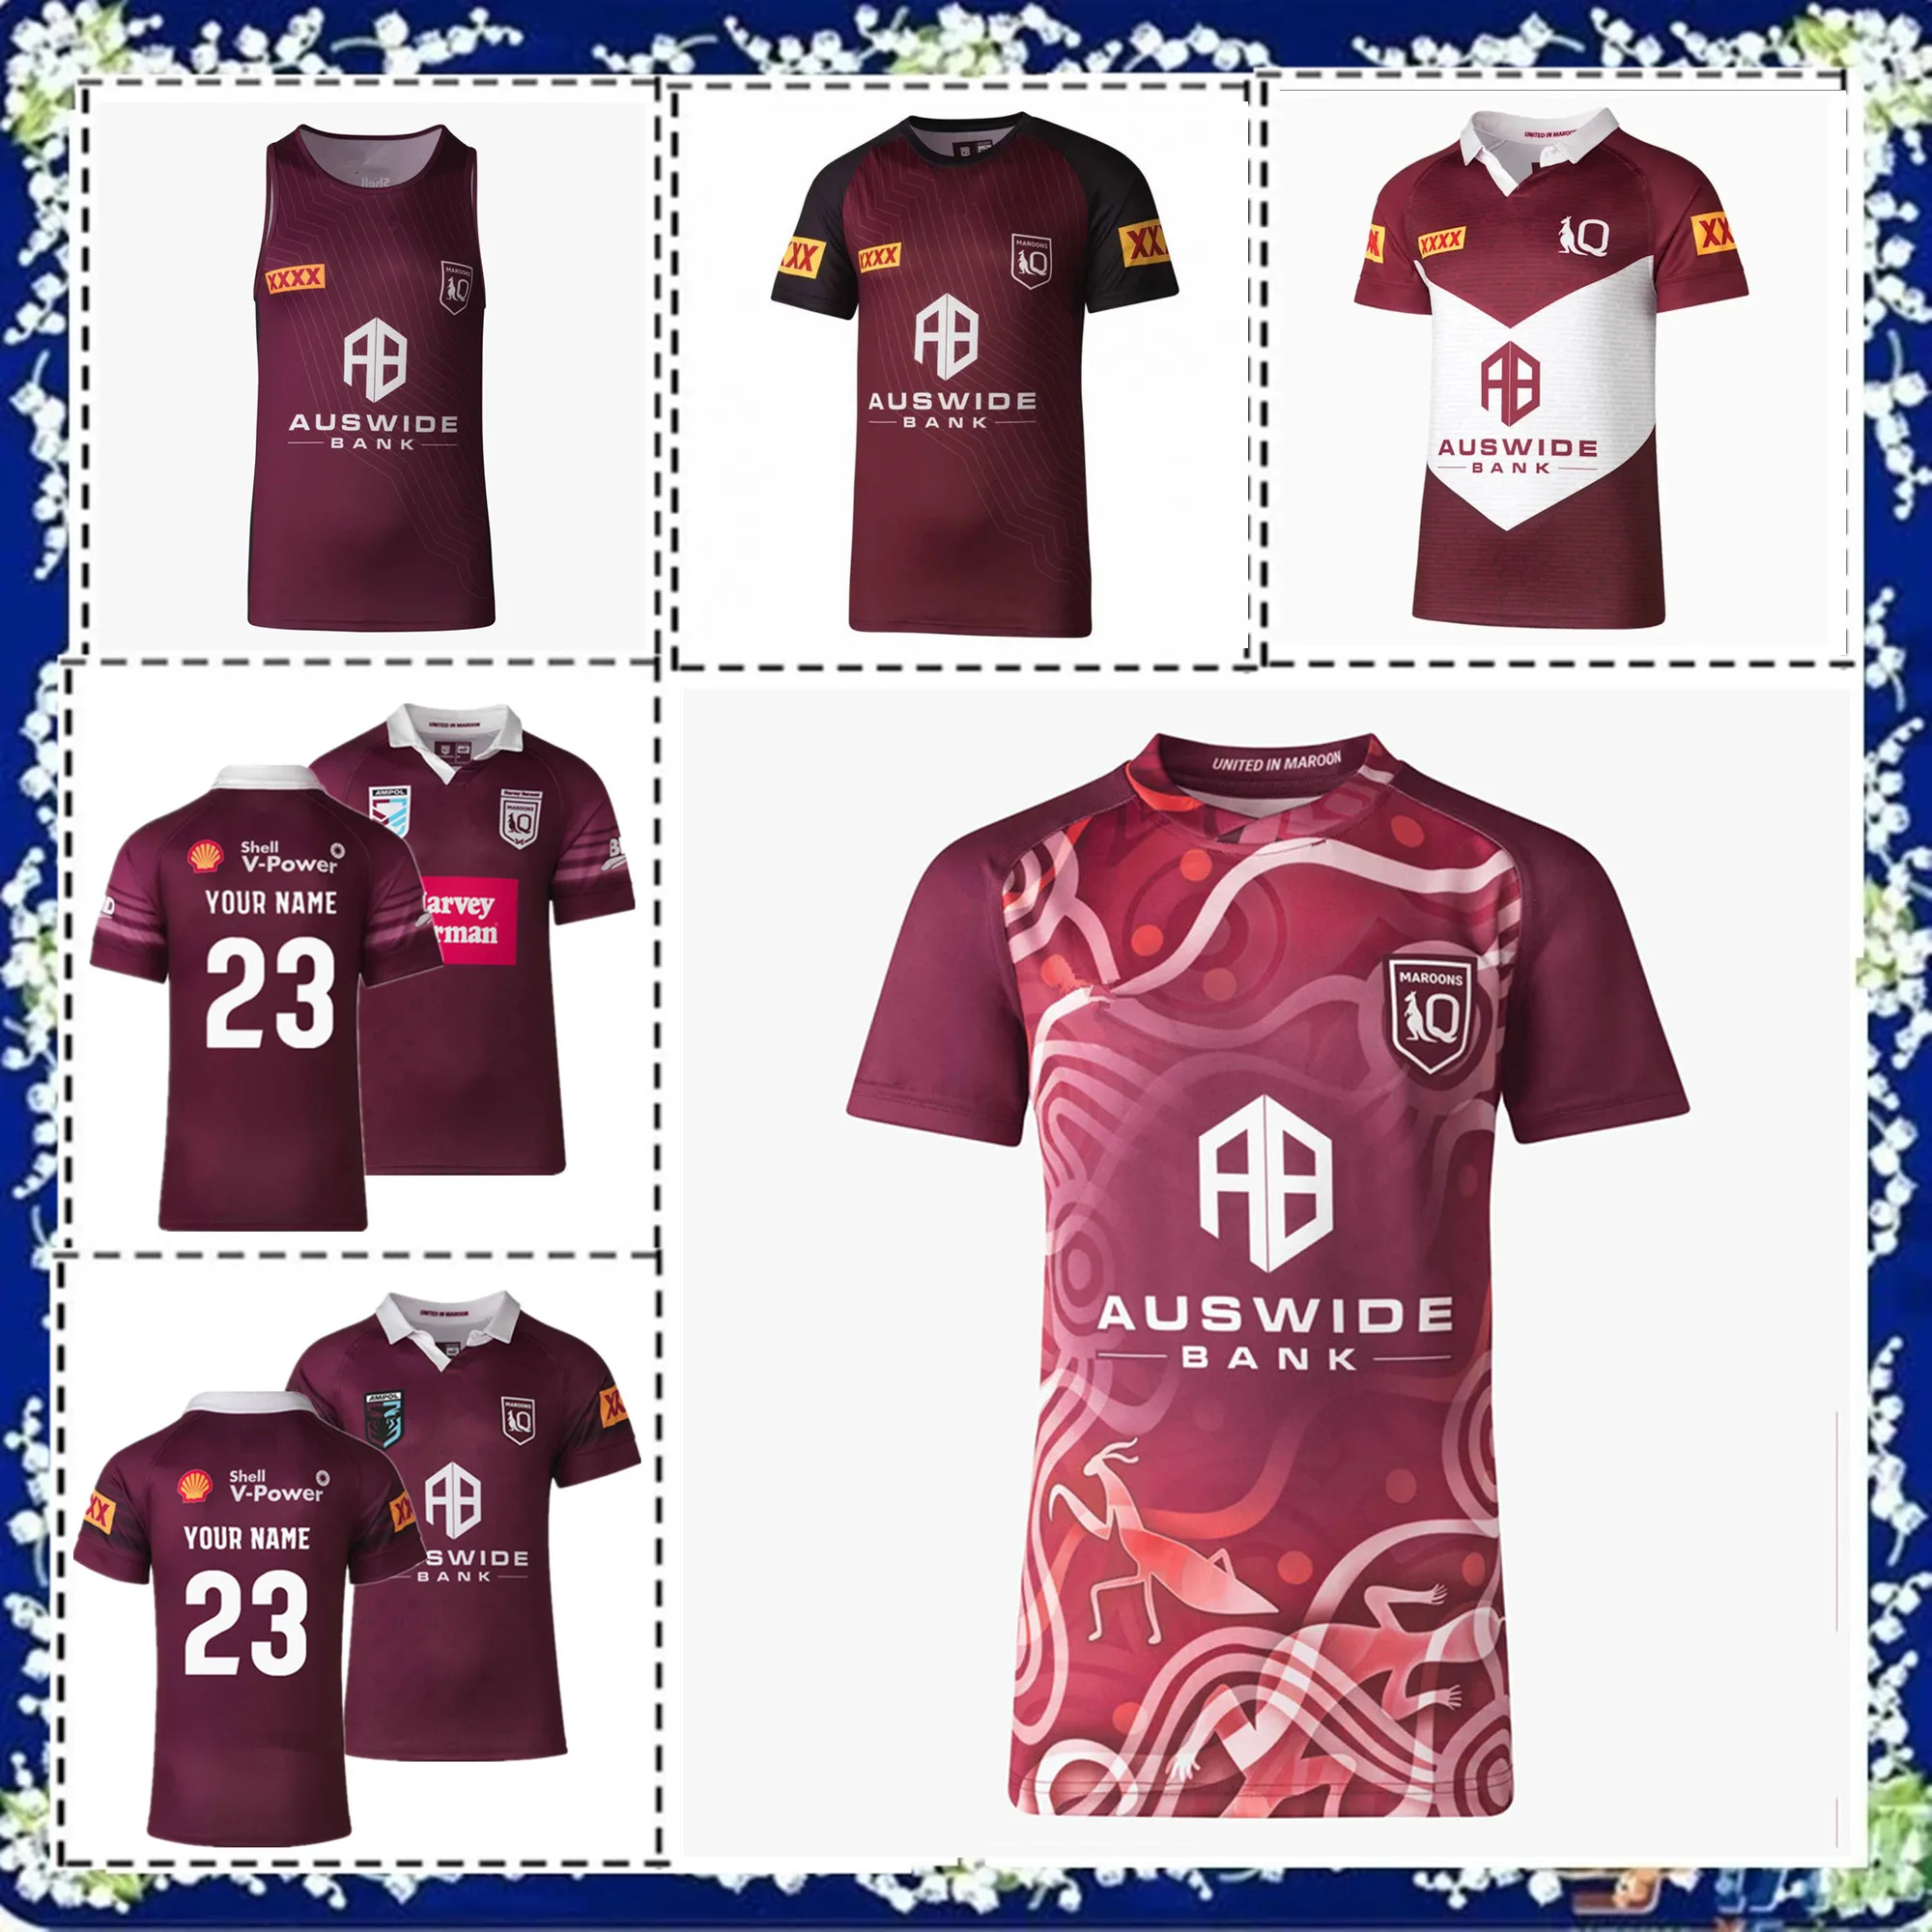 

2023 QLD Maroons Indigenous Jersey 2023/24 QUEENSLAND MAROONS STATE OF ORIGIN COMMEMORATIVE ANZAC TRAINING JERSEY size S-5XL